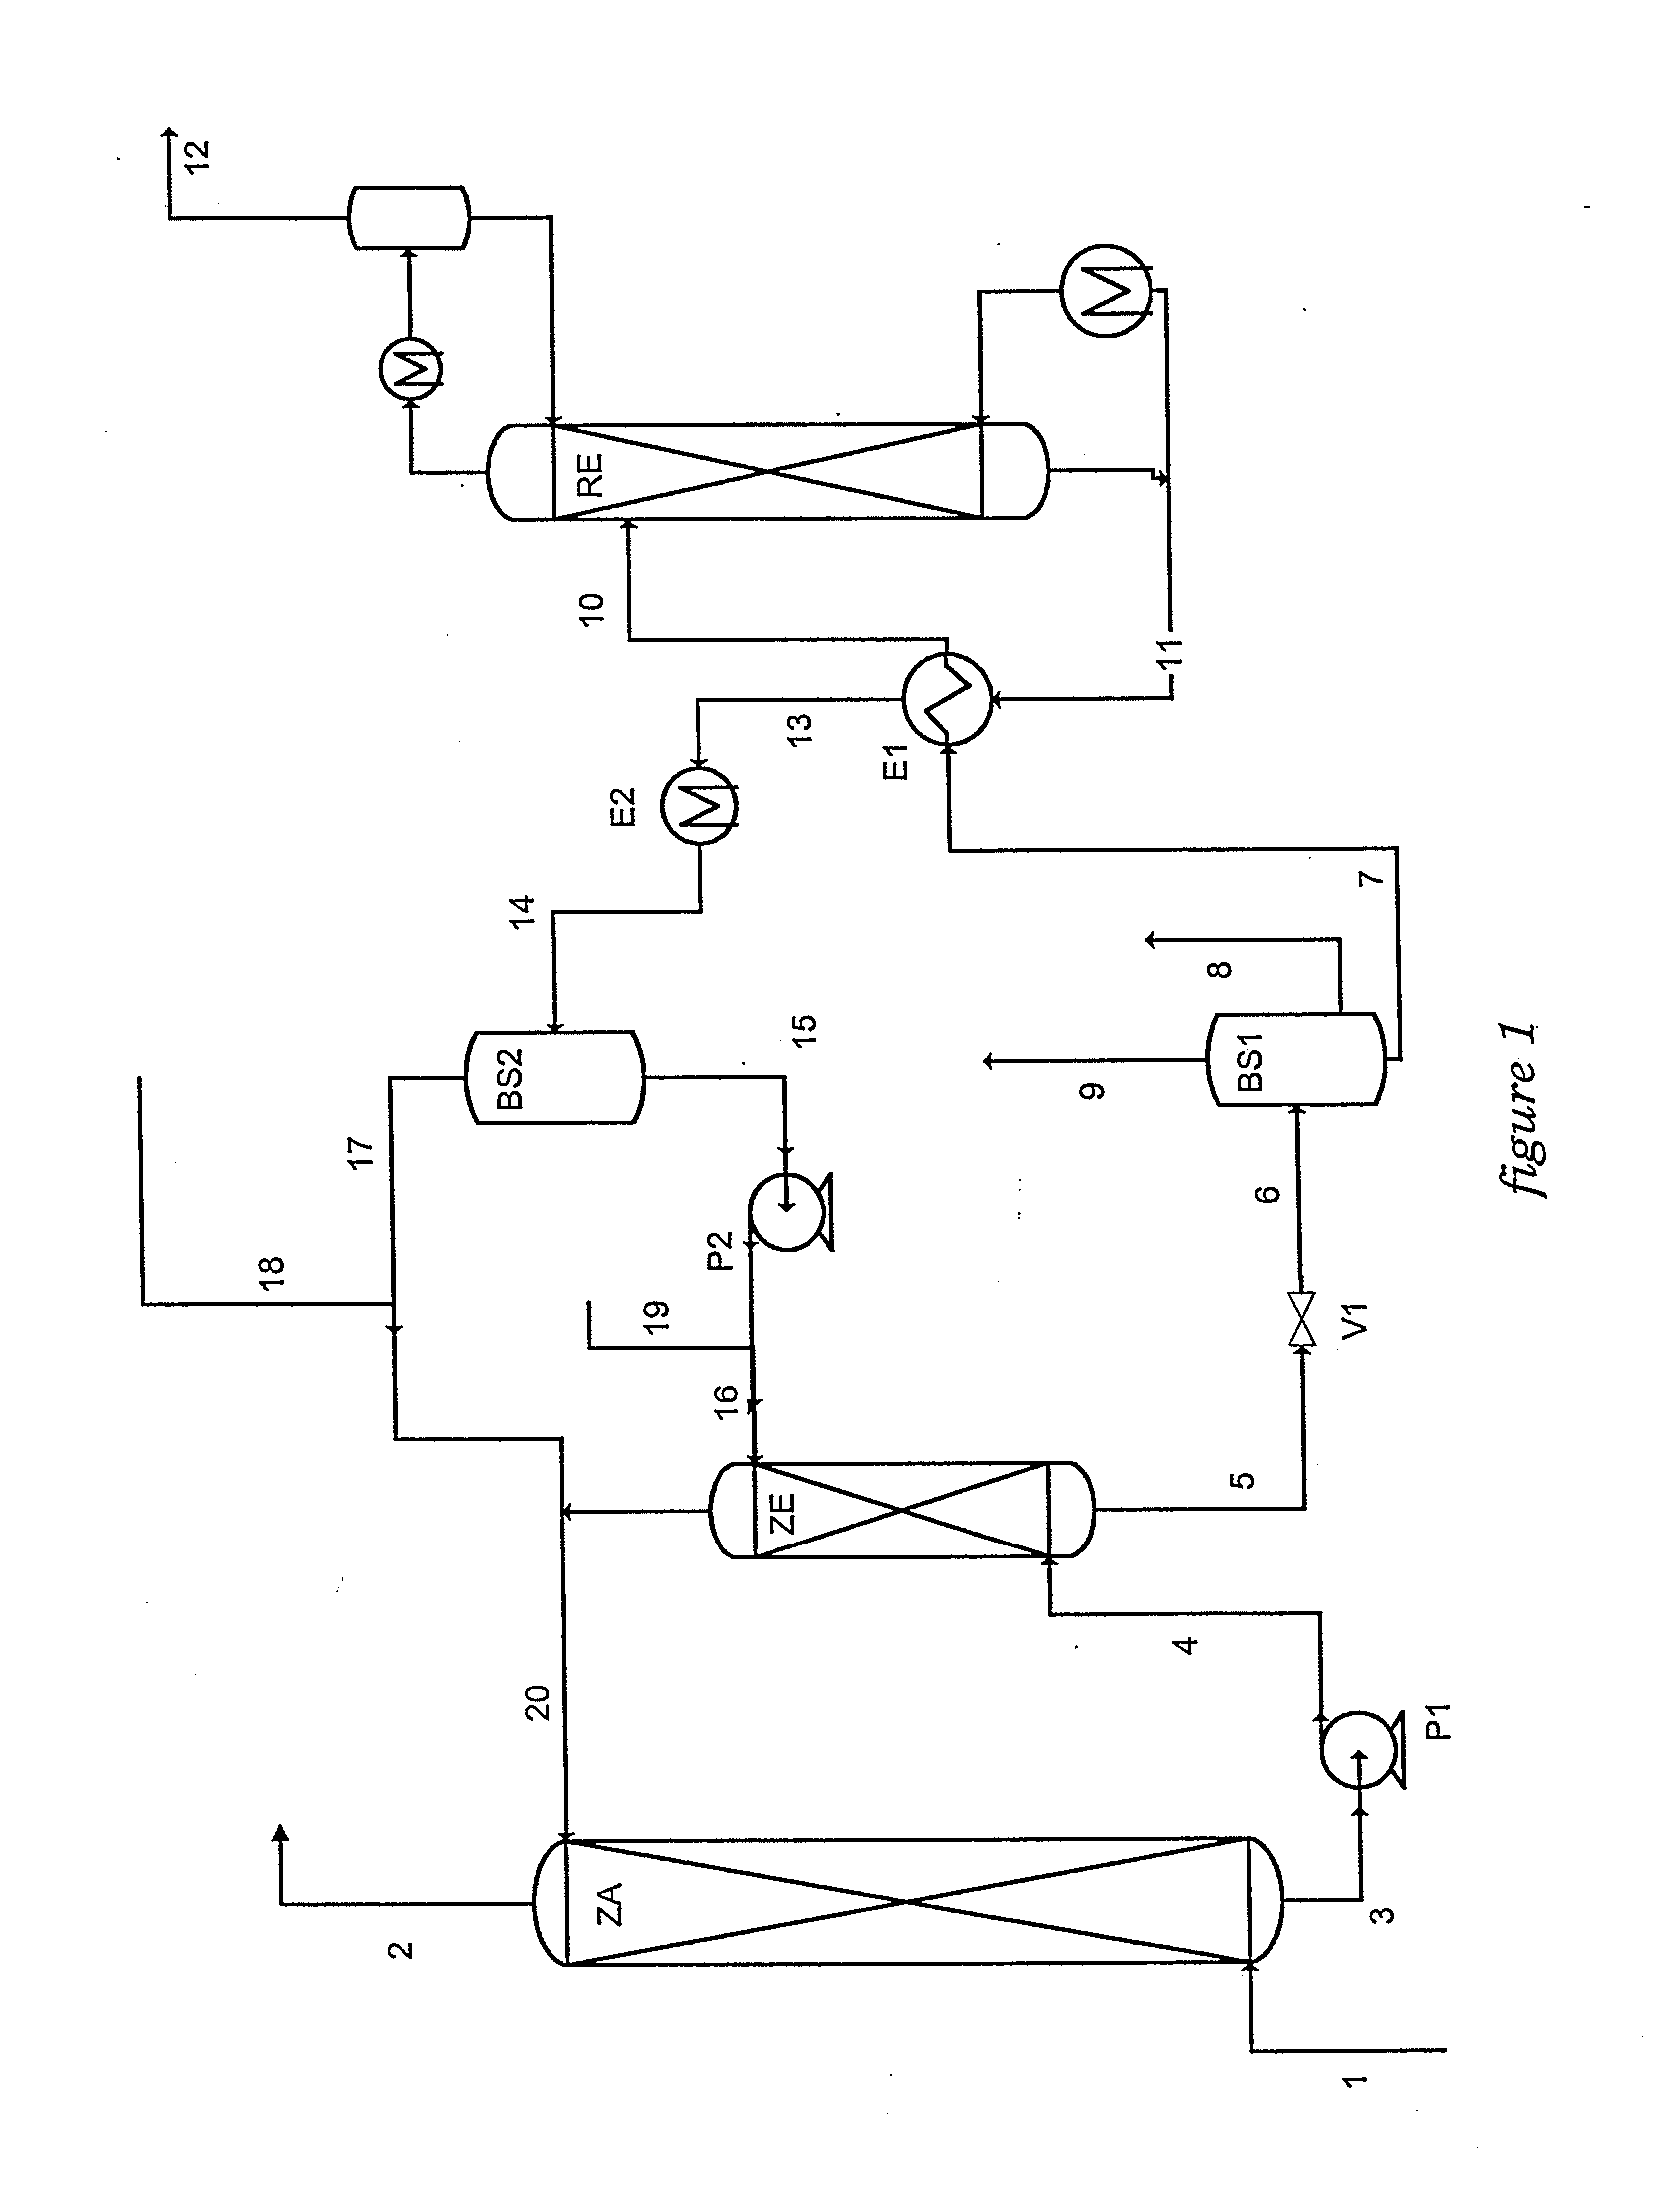 Method of deacidizing a gaseous effluent with extraction of the products to be regenerated